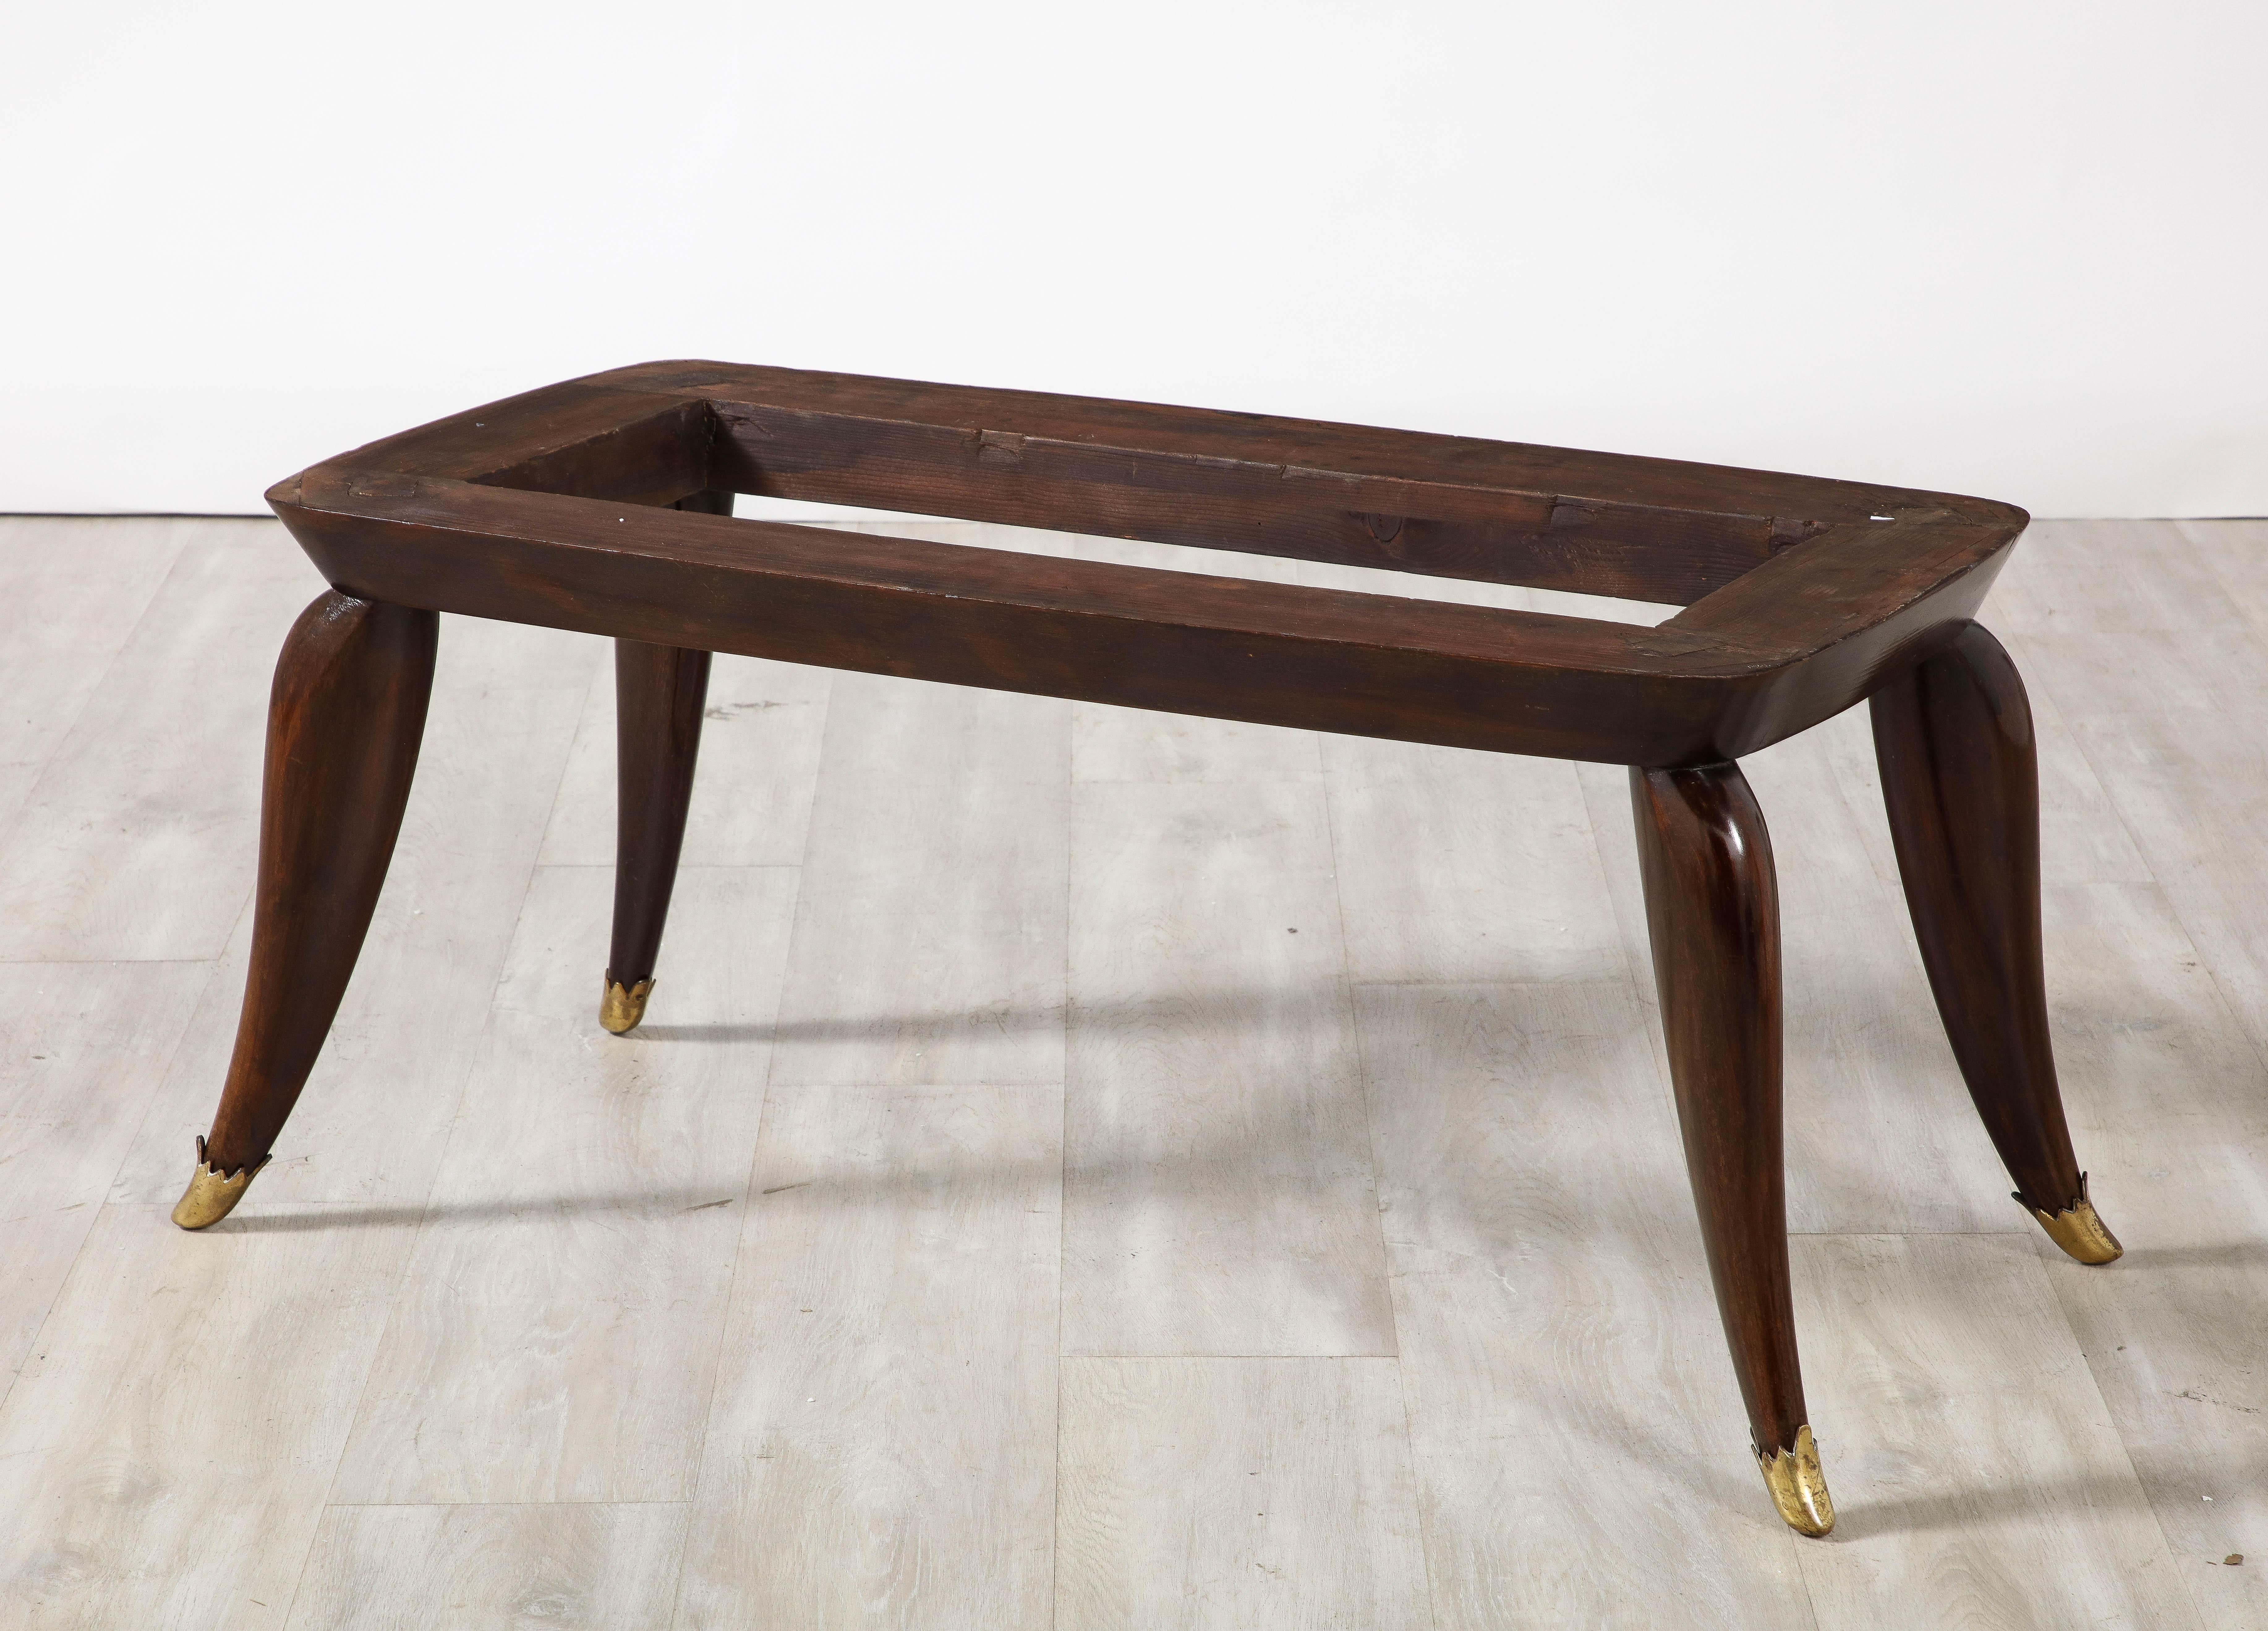 Italian Florentine Walnut and Verdi Alpi Marble Coffee Table, circa 1940 In Good Condition For Sale In New York, NY